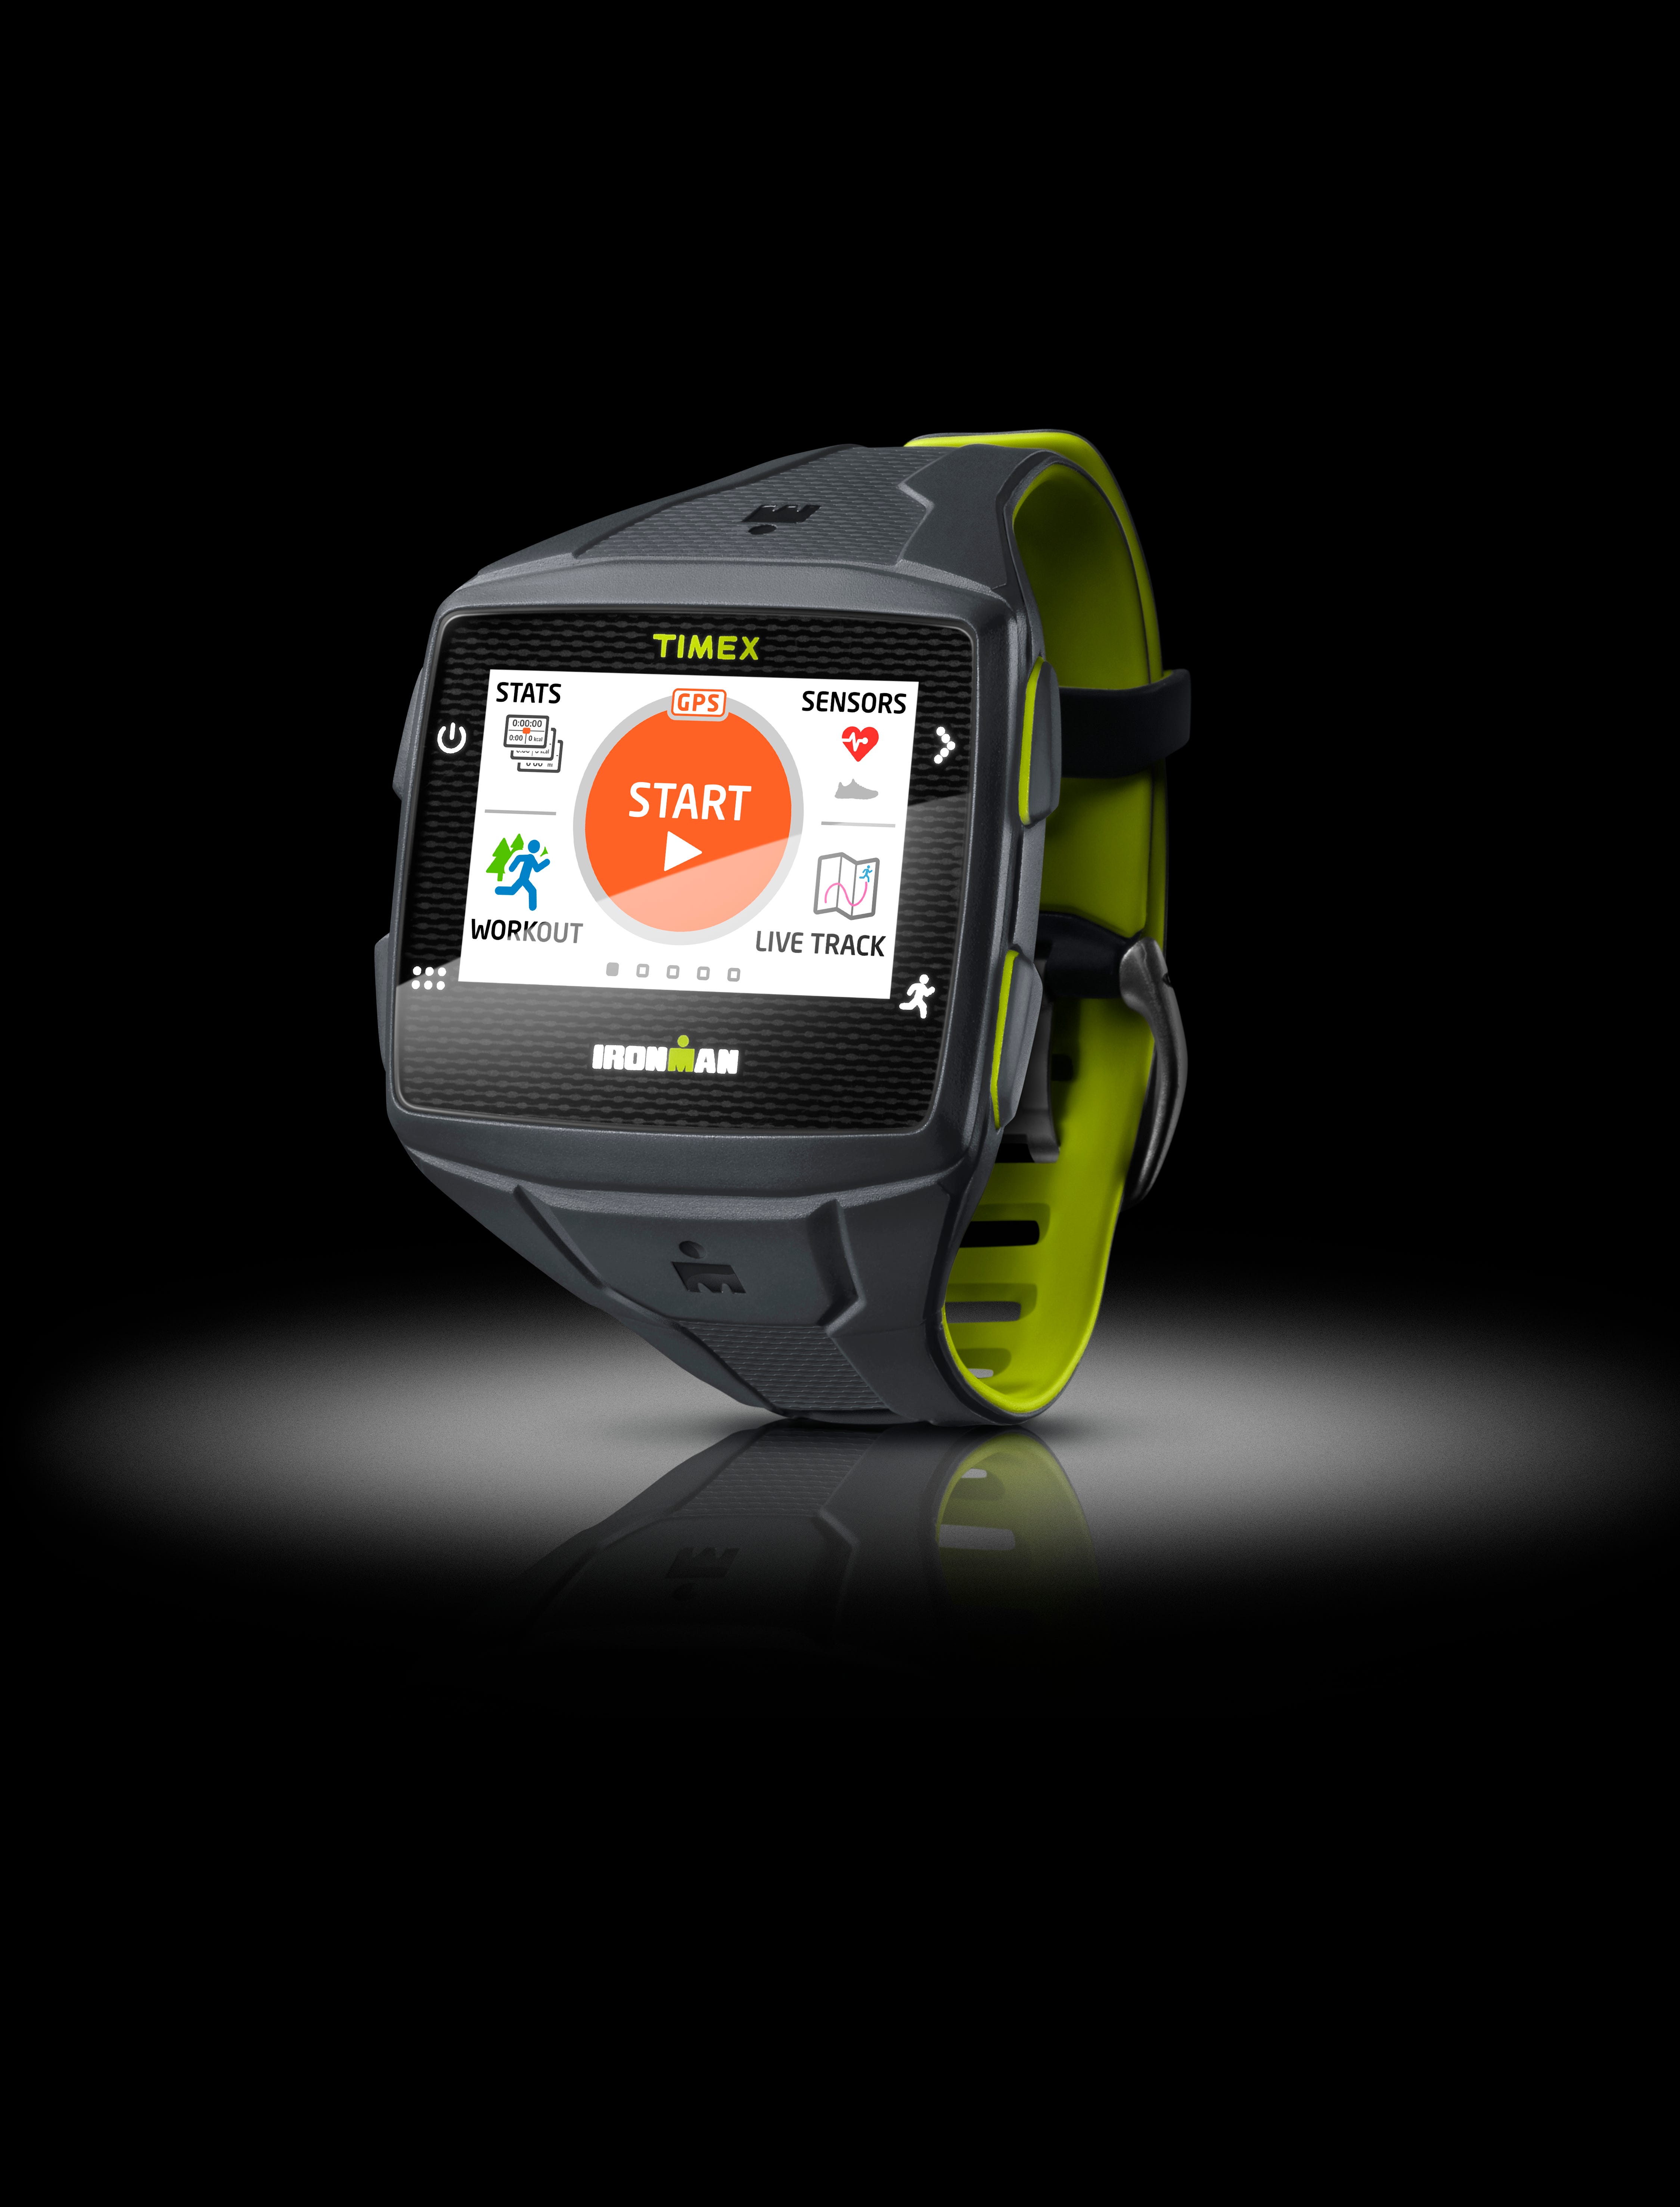 Timex enters smartwatch category. No phone needed.